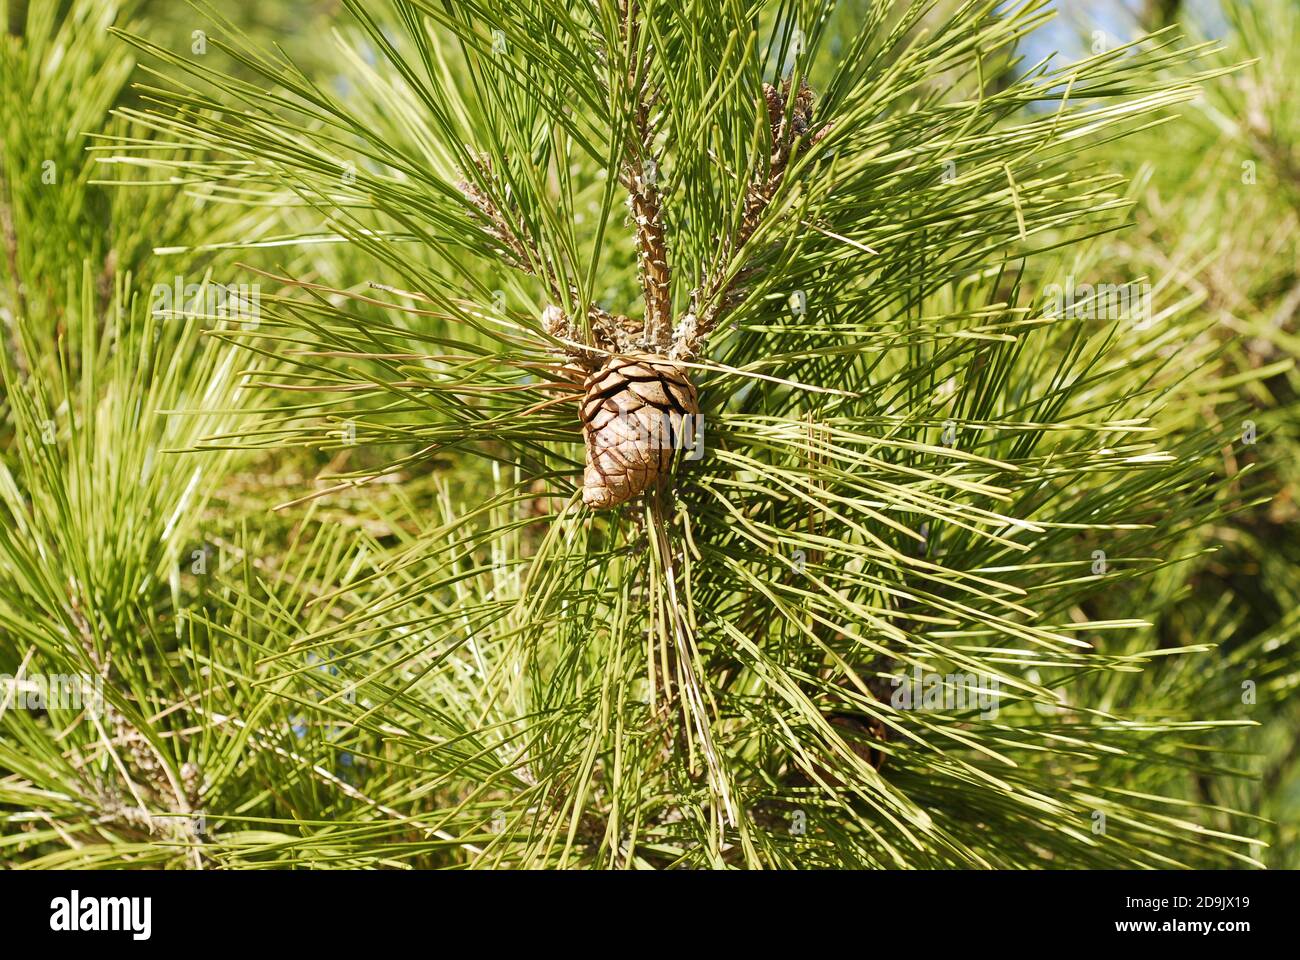 A brown pine cone with many green pine needles Stock Photo